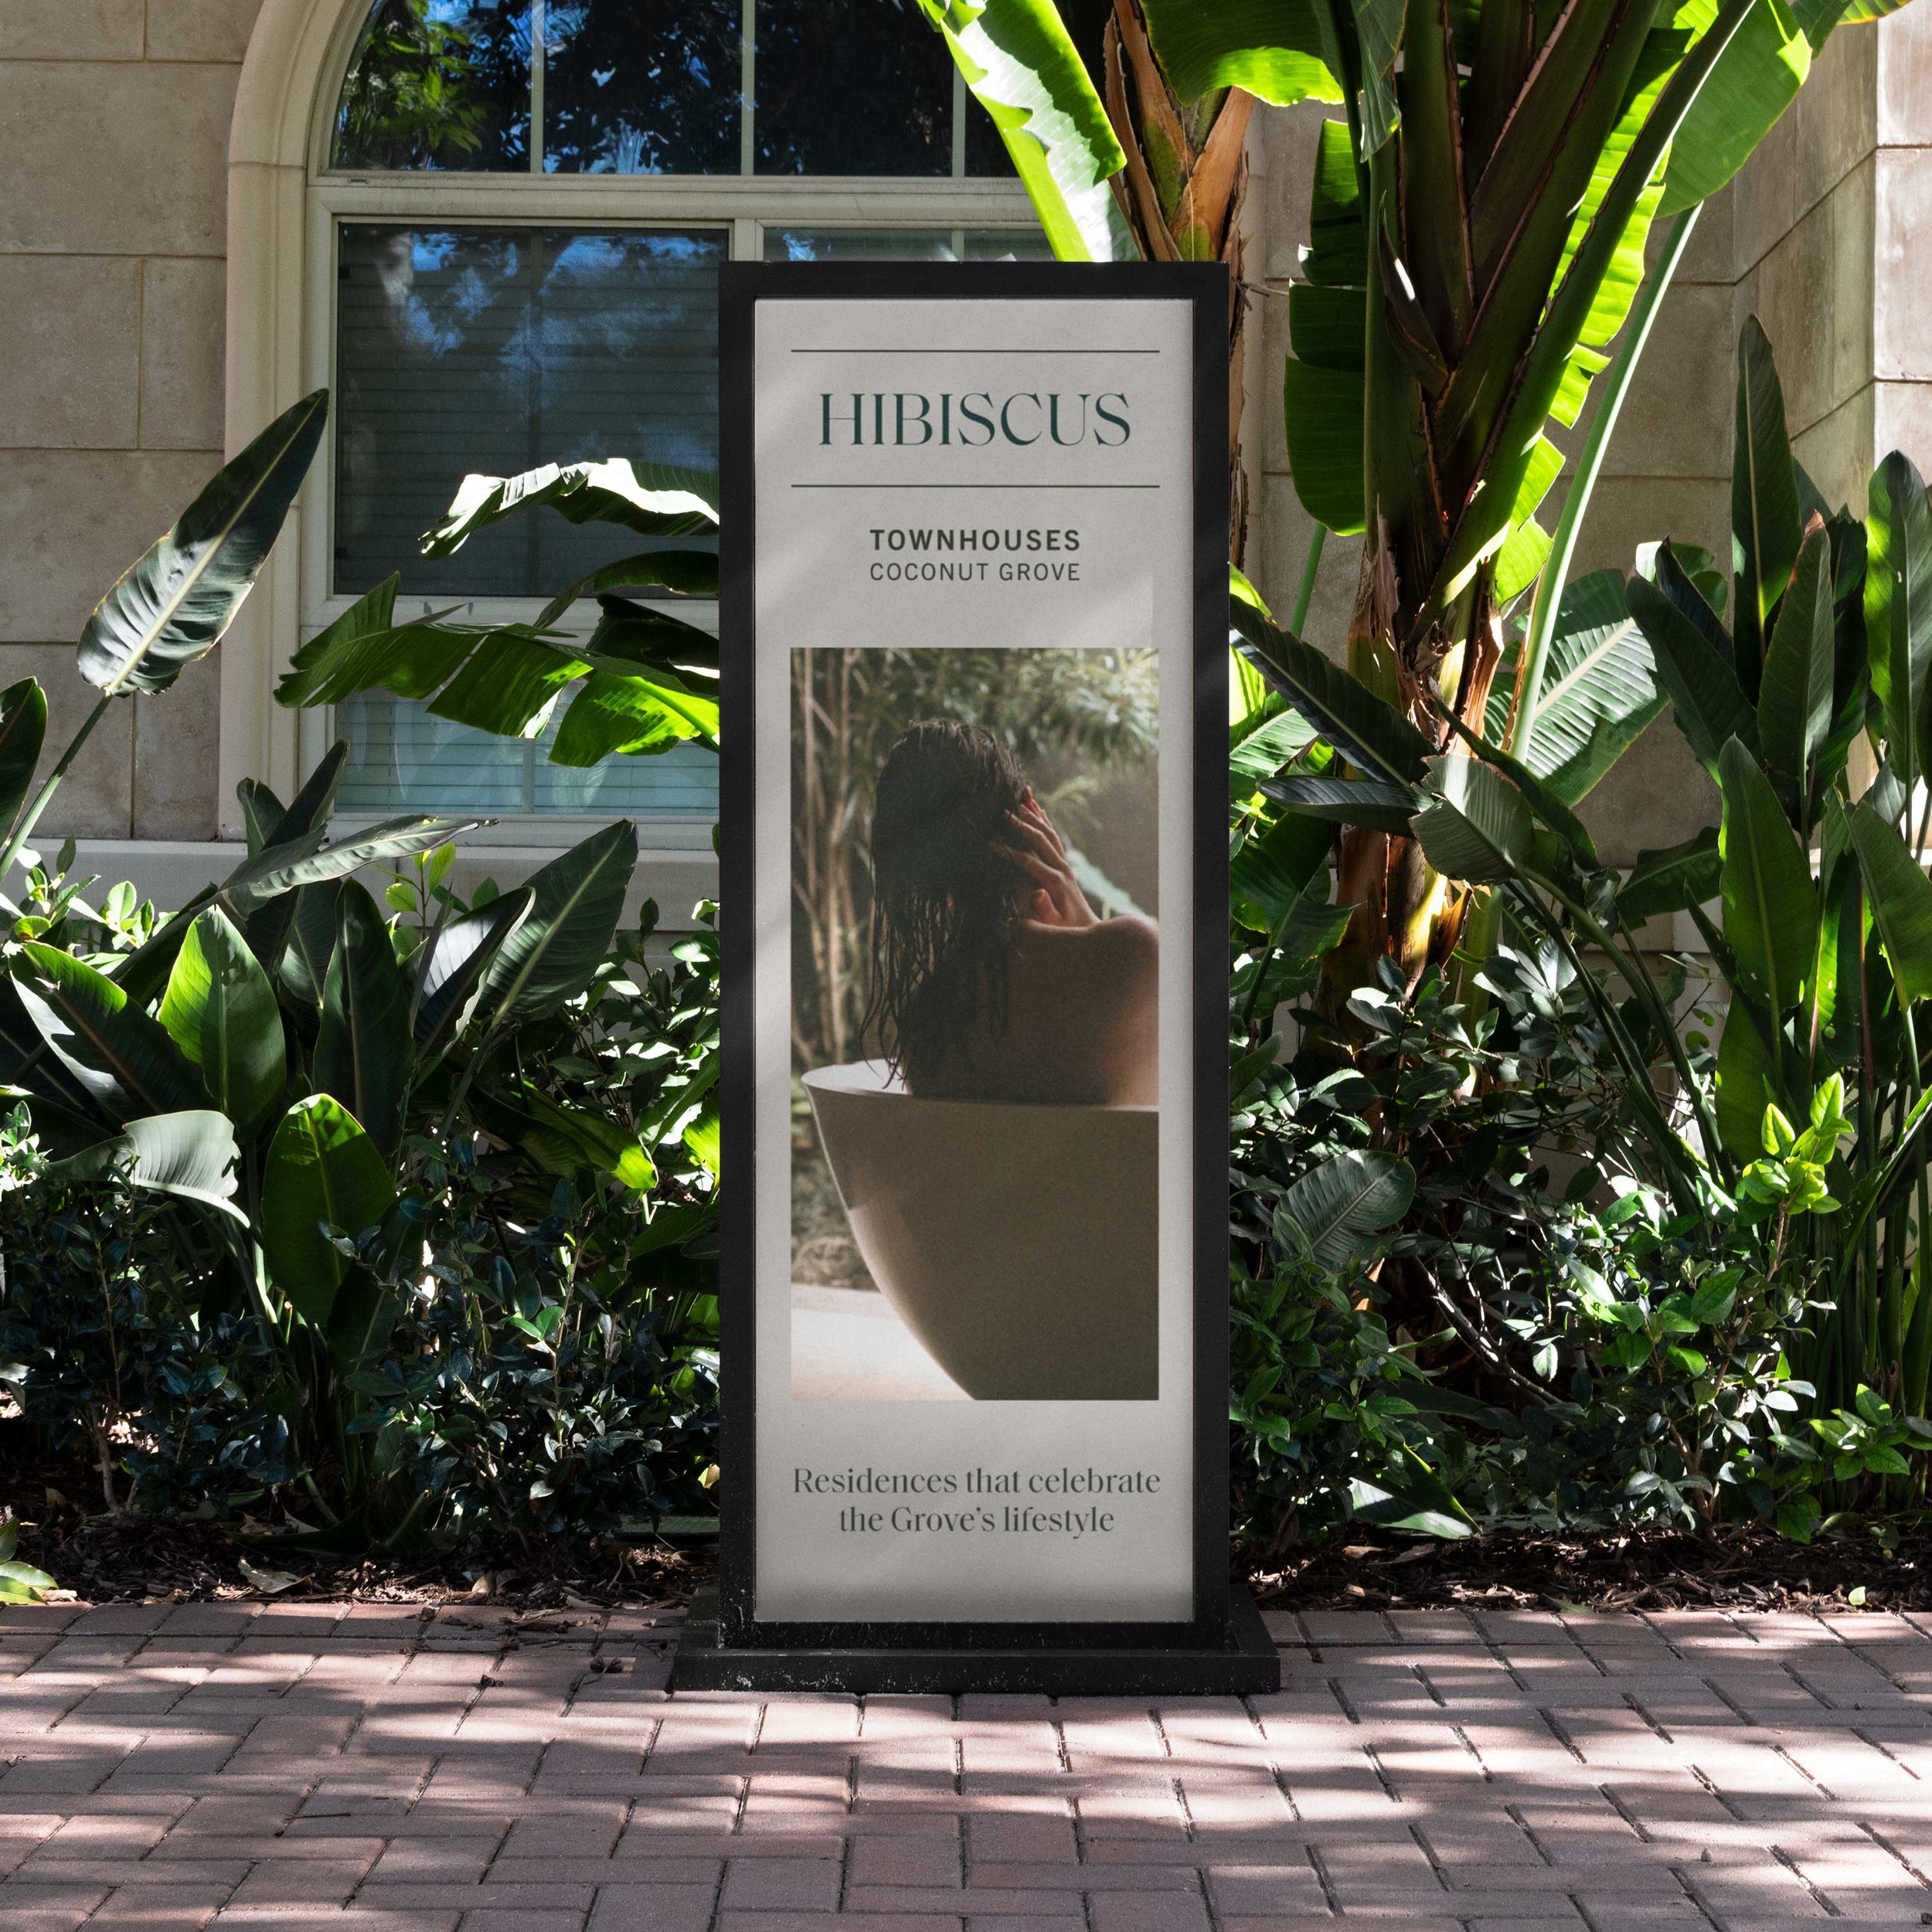 behagen-Branding-and-Marketing-for-Real-Estate-Hibiscus-Townhouses-Miami-Cover.jpg